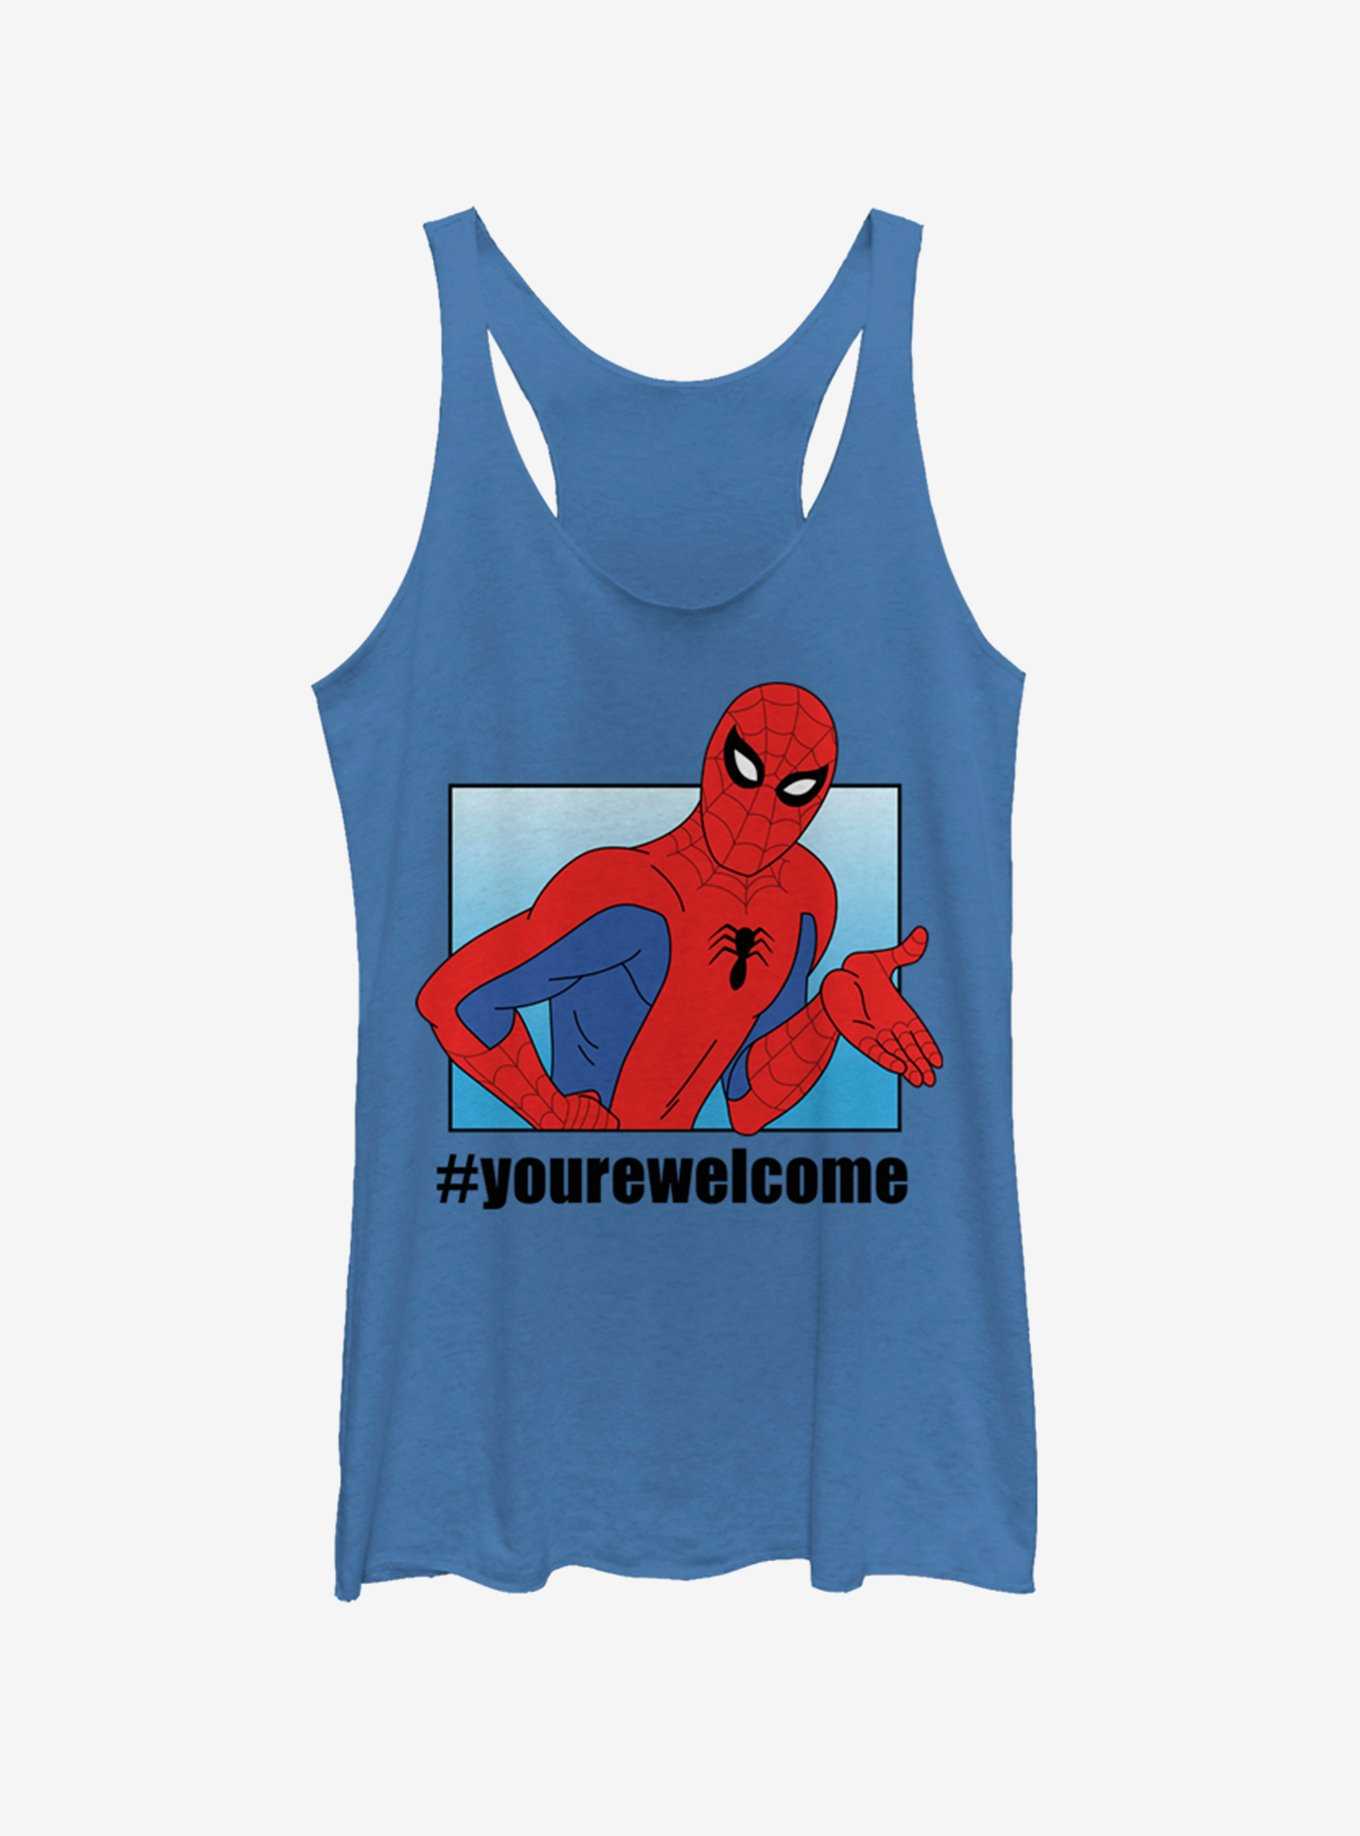 Marvel Spider-Man #yourewelcome Womens Tank Top, , hi-res